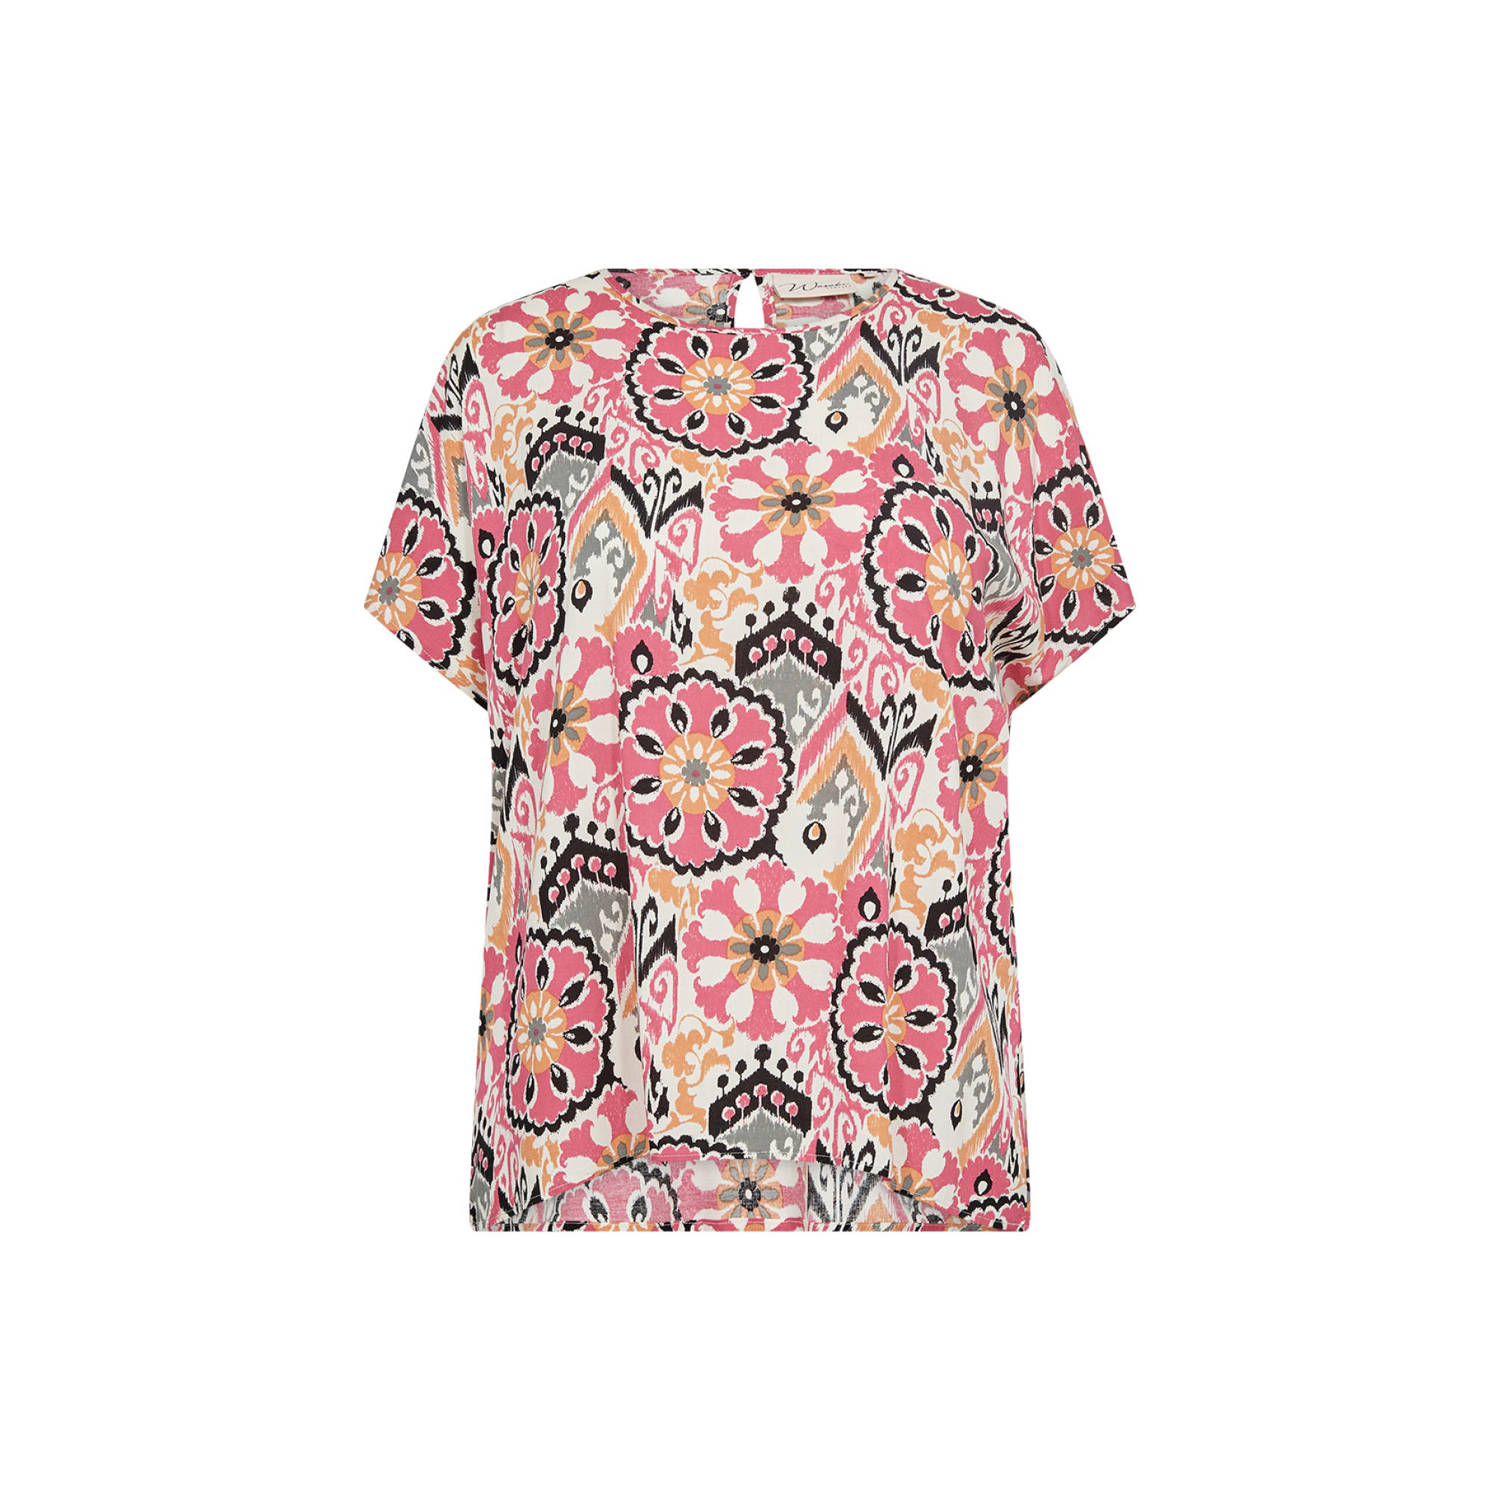 Wasabiconcept top met all over print roze